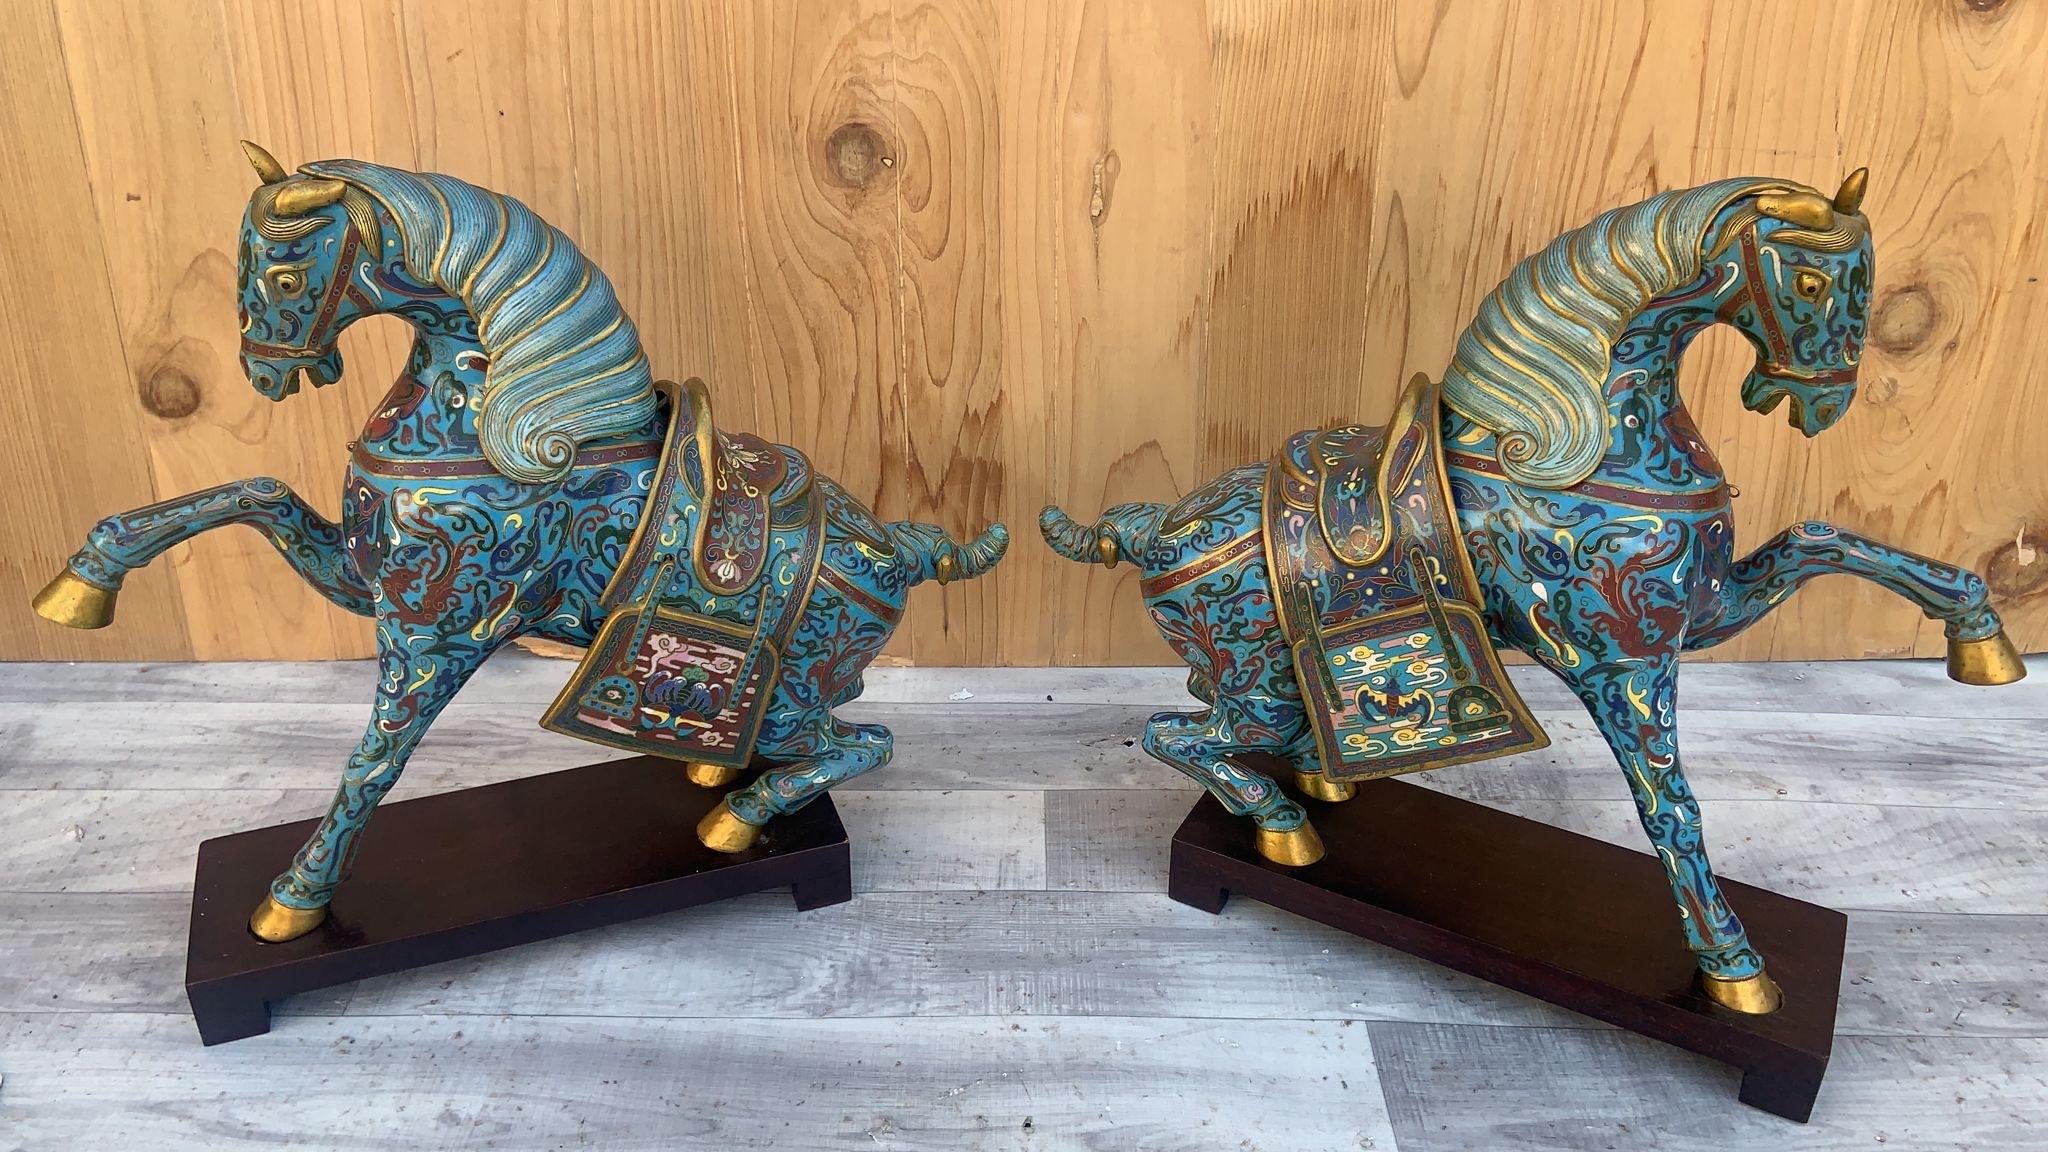 Vintage Chinese Cloisonné War Horse Sculptures on Mahogany Base - Pair For Sale 5